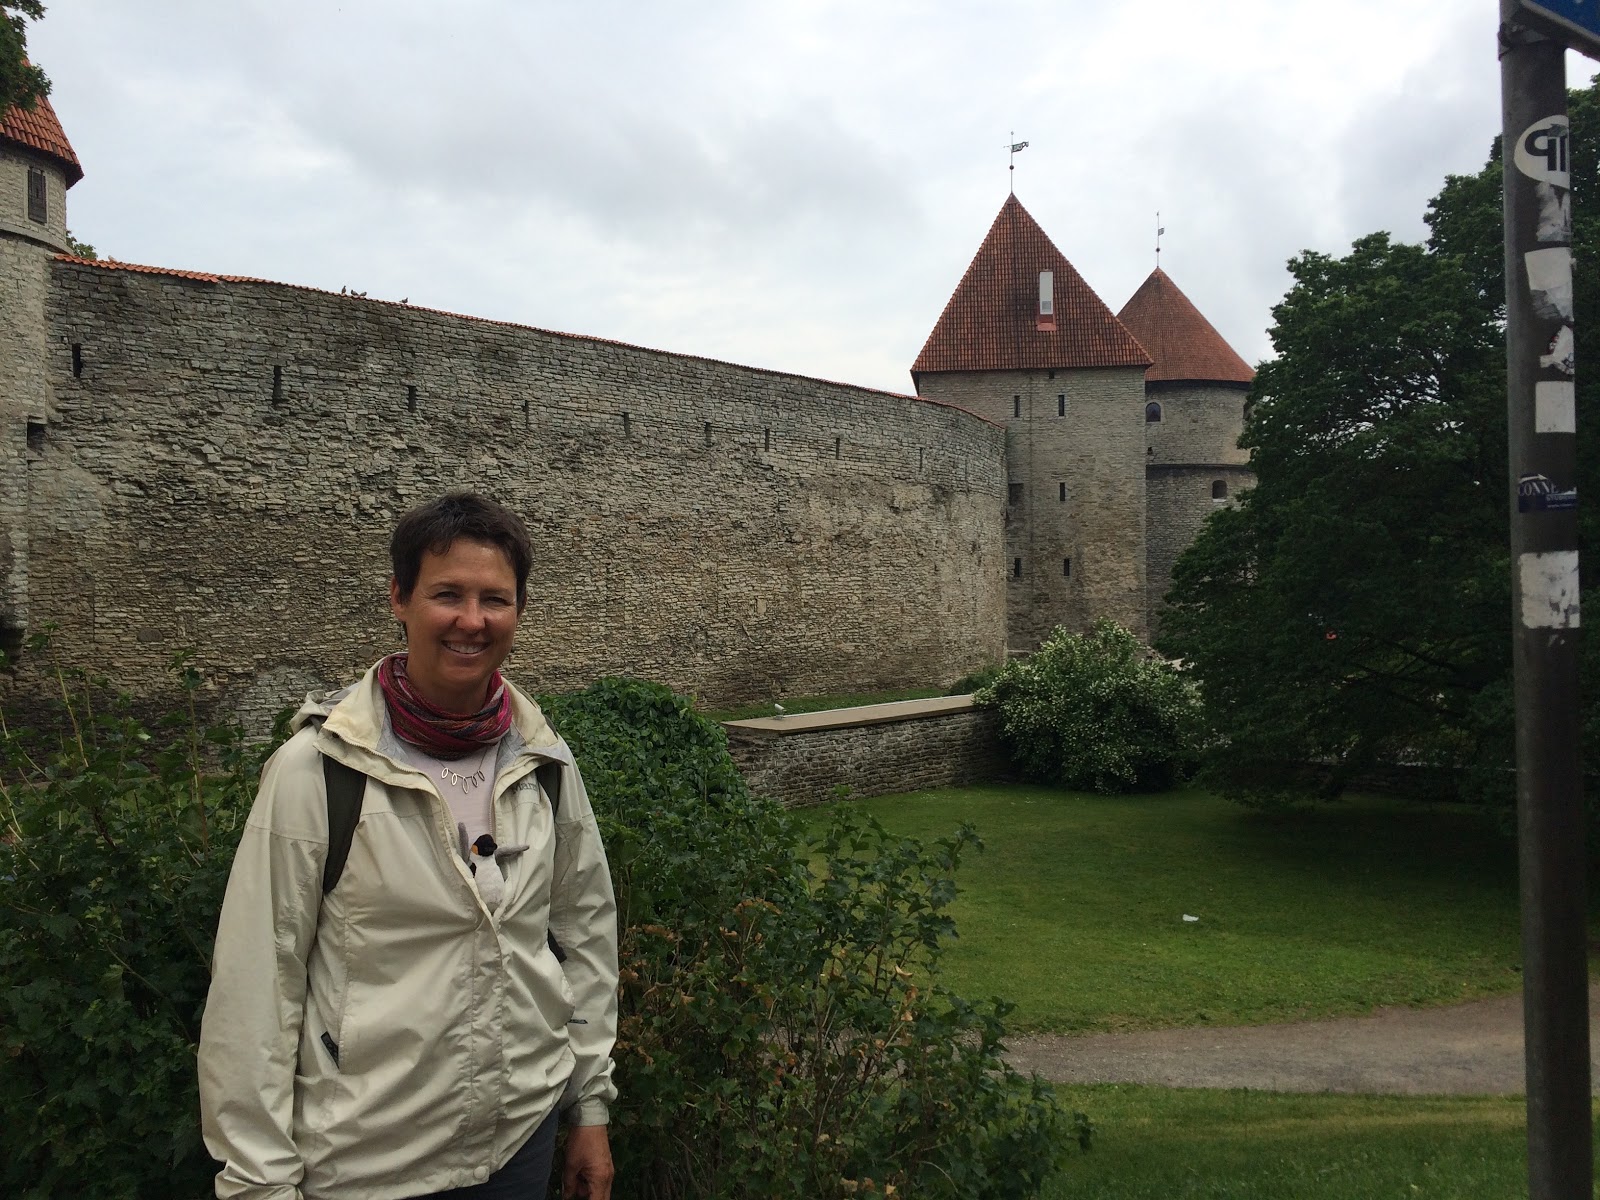 Outside the medieval walls